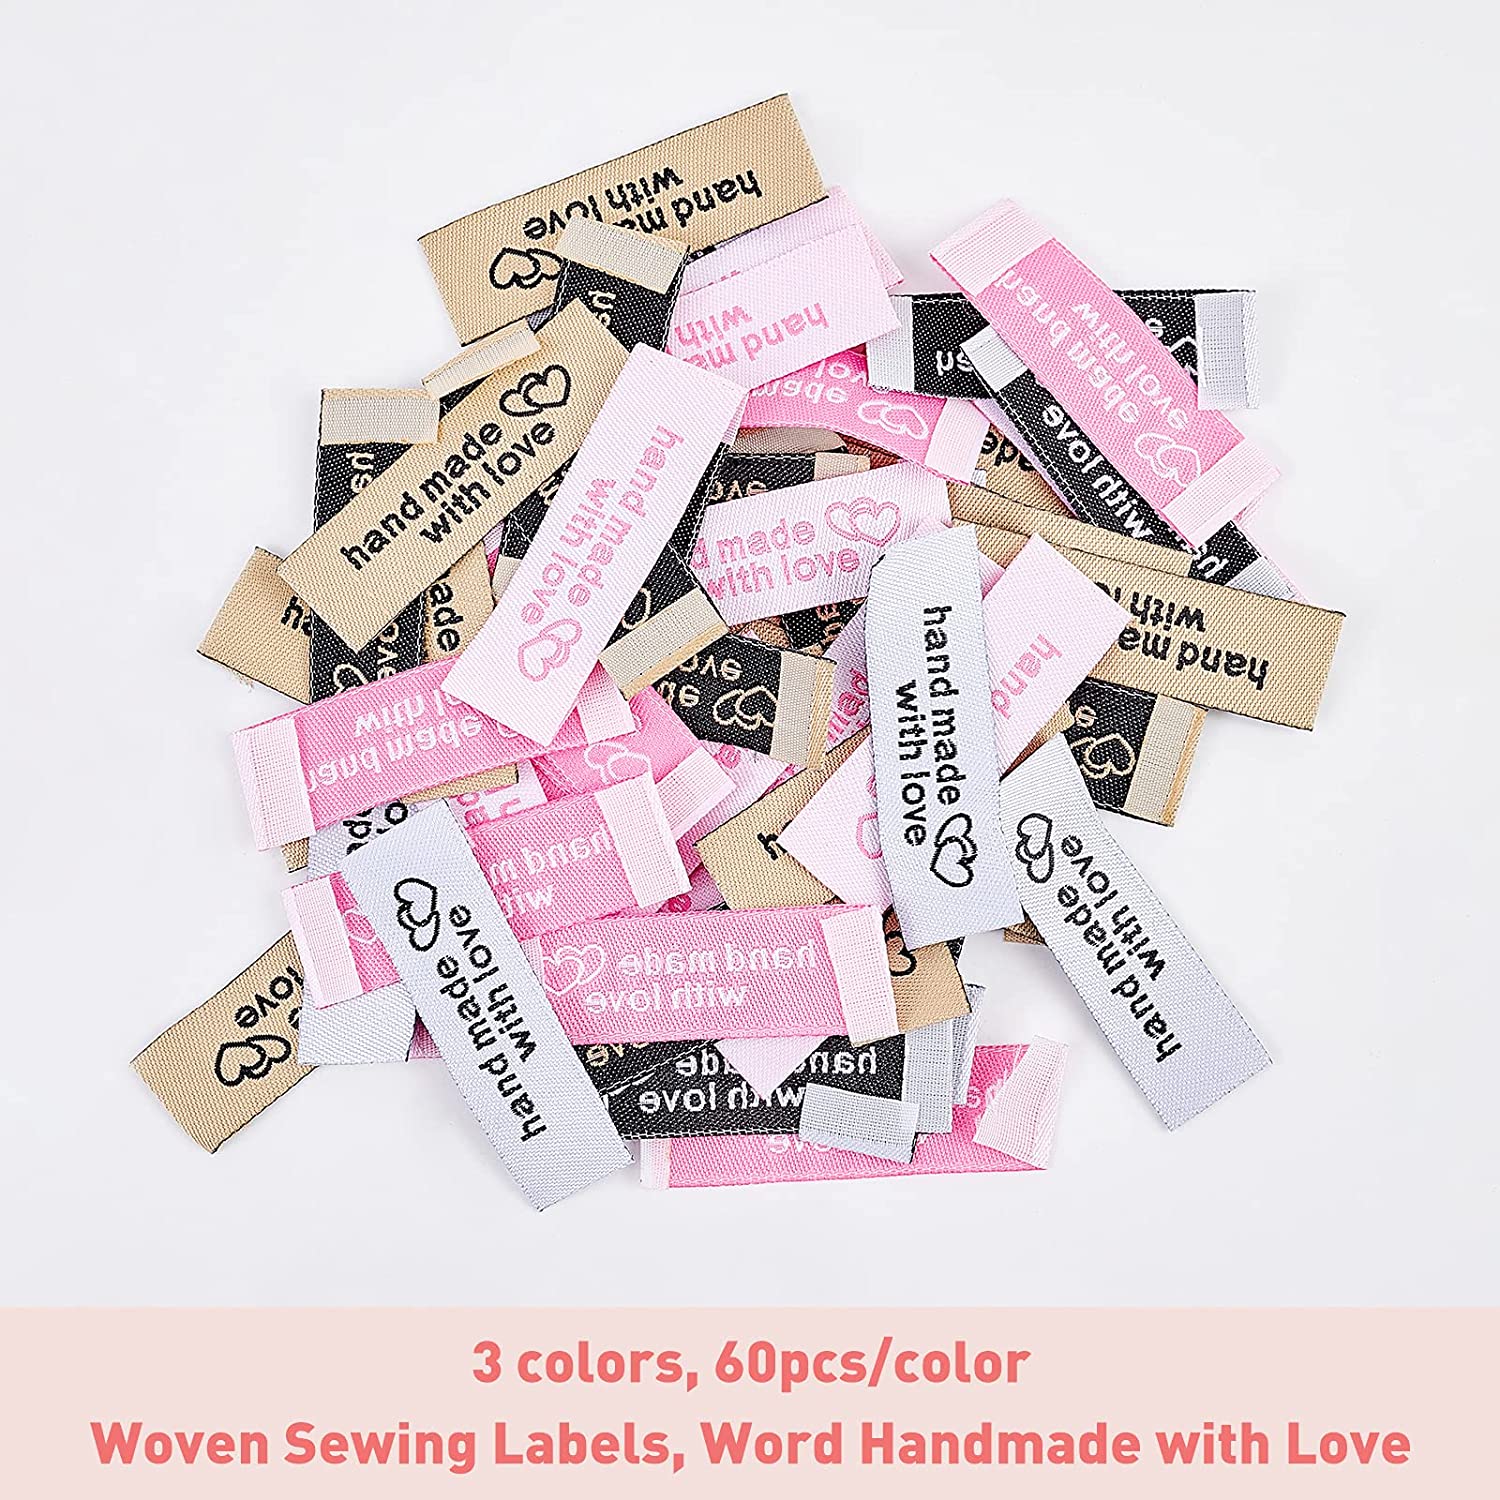 180 PCS Woven Sew-on Tags 3 Colors Pre-Cut Sew On Labels Handmade